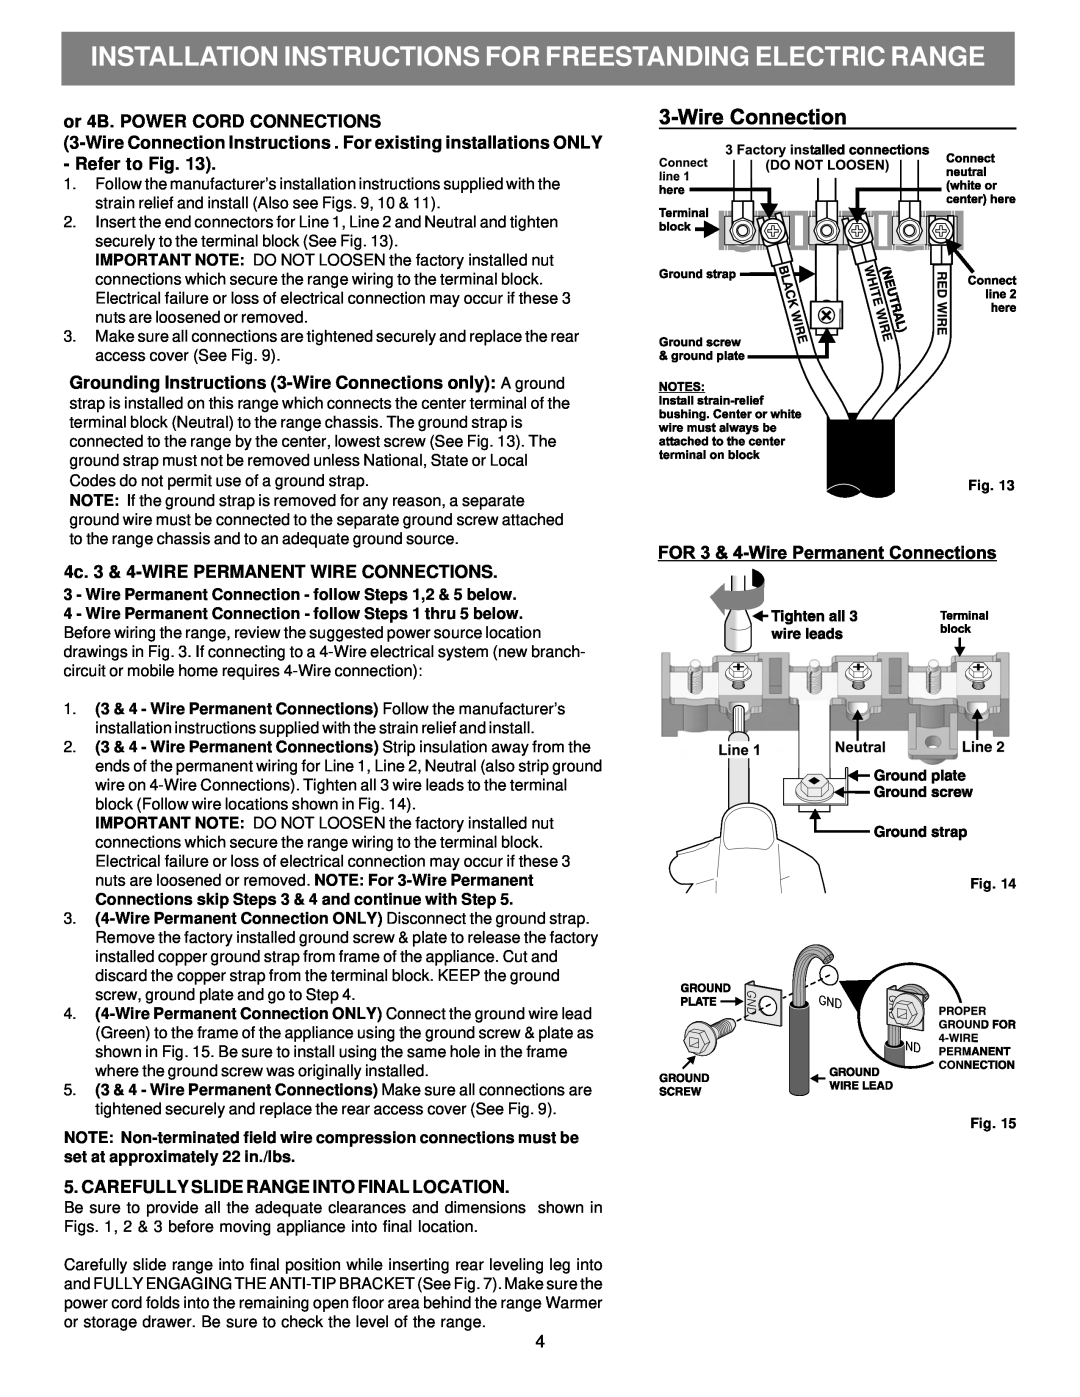 Electrolux 316454909 installation instructions or 4B. POWER CORD CONNECTIONS, 4c. 3 & 4-WIRE PERMANENT WIRE CONNECTIONS 